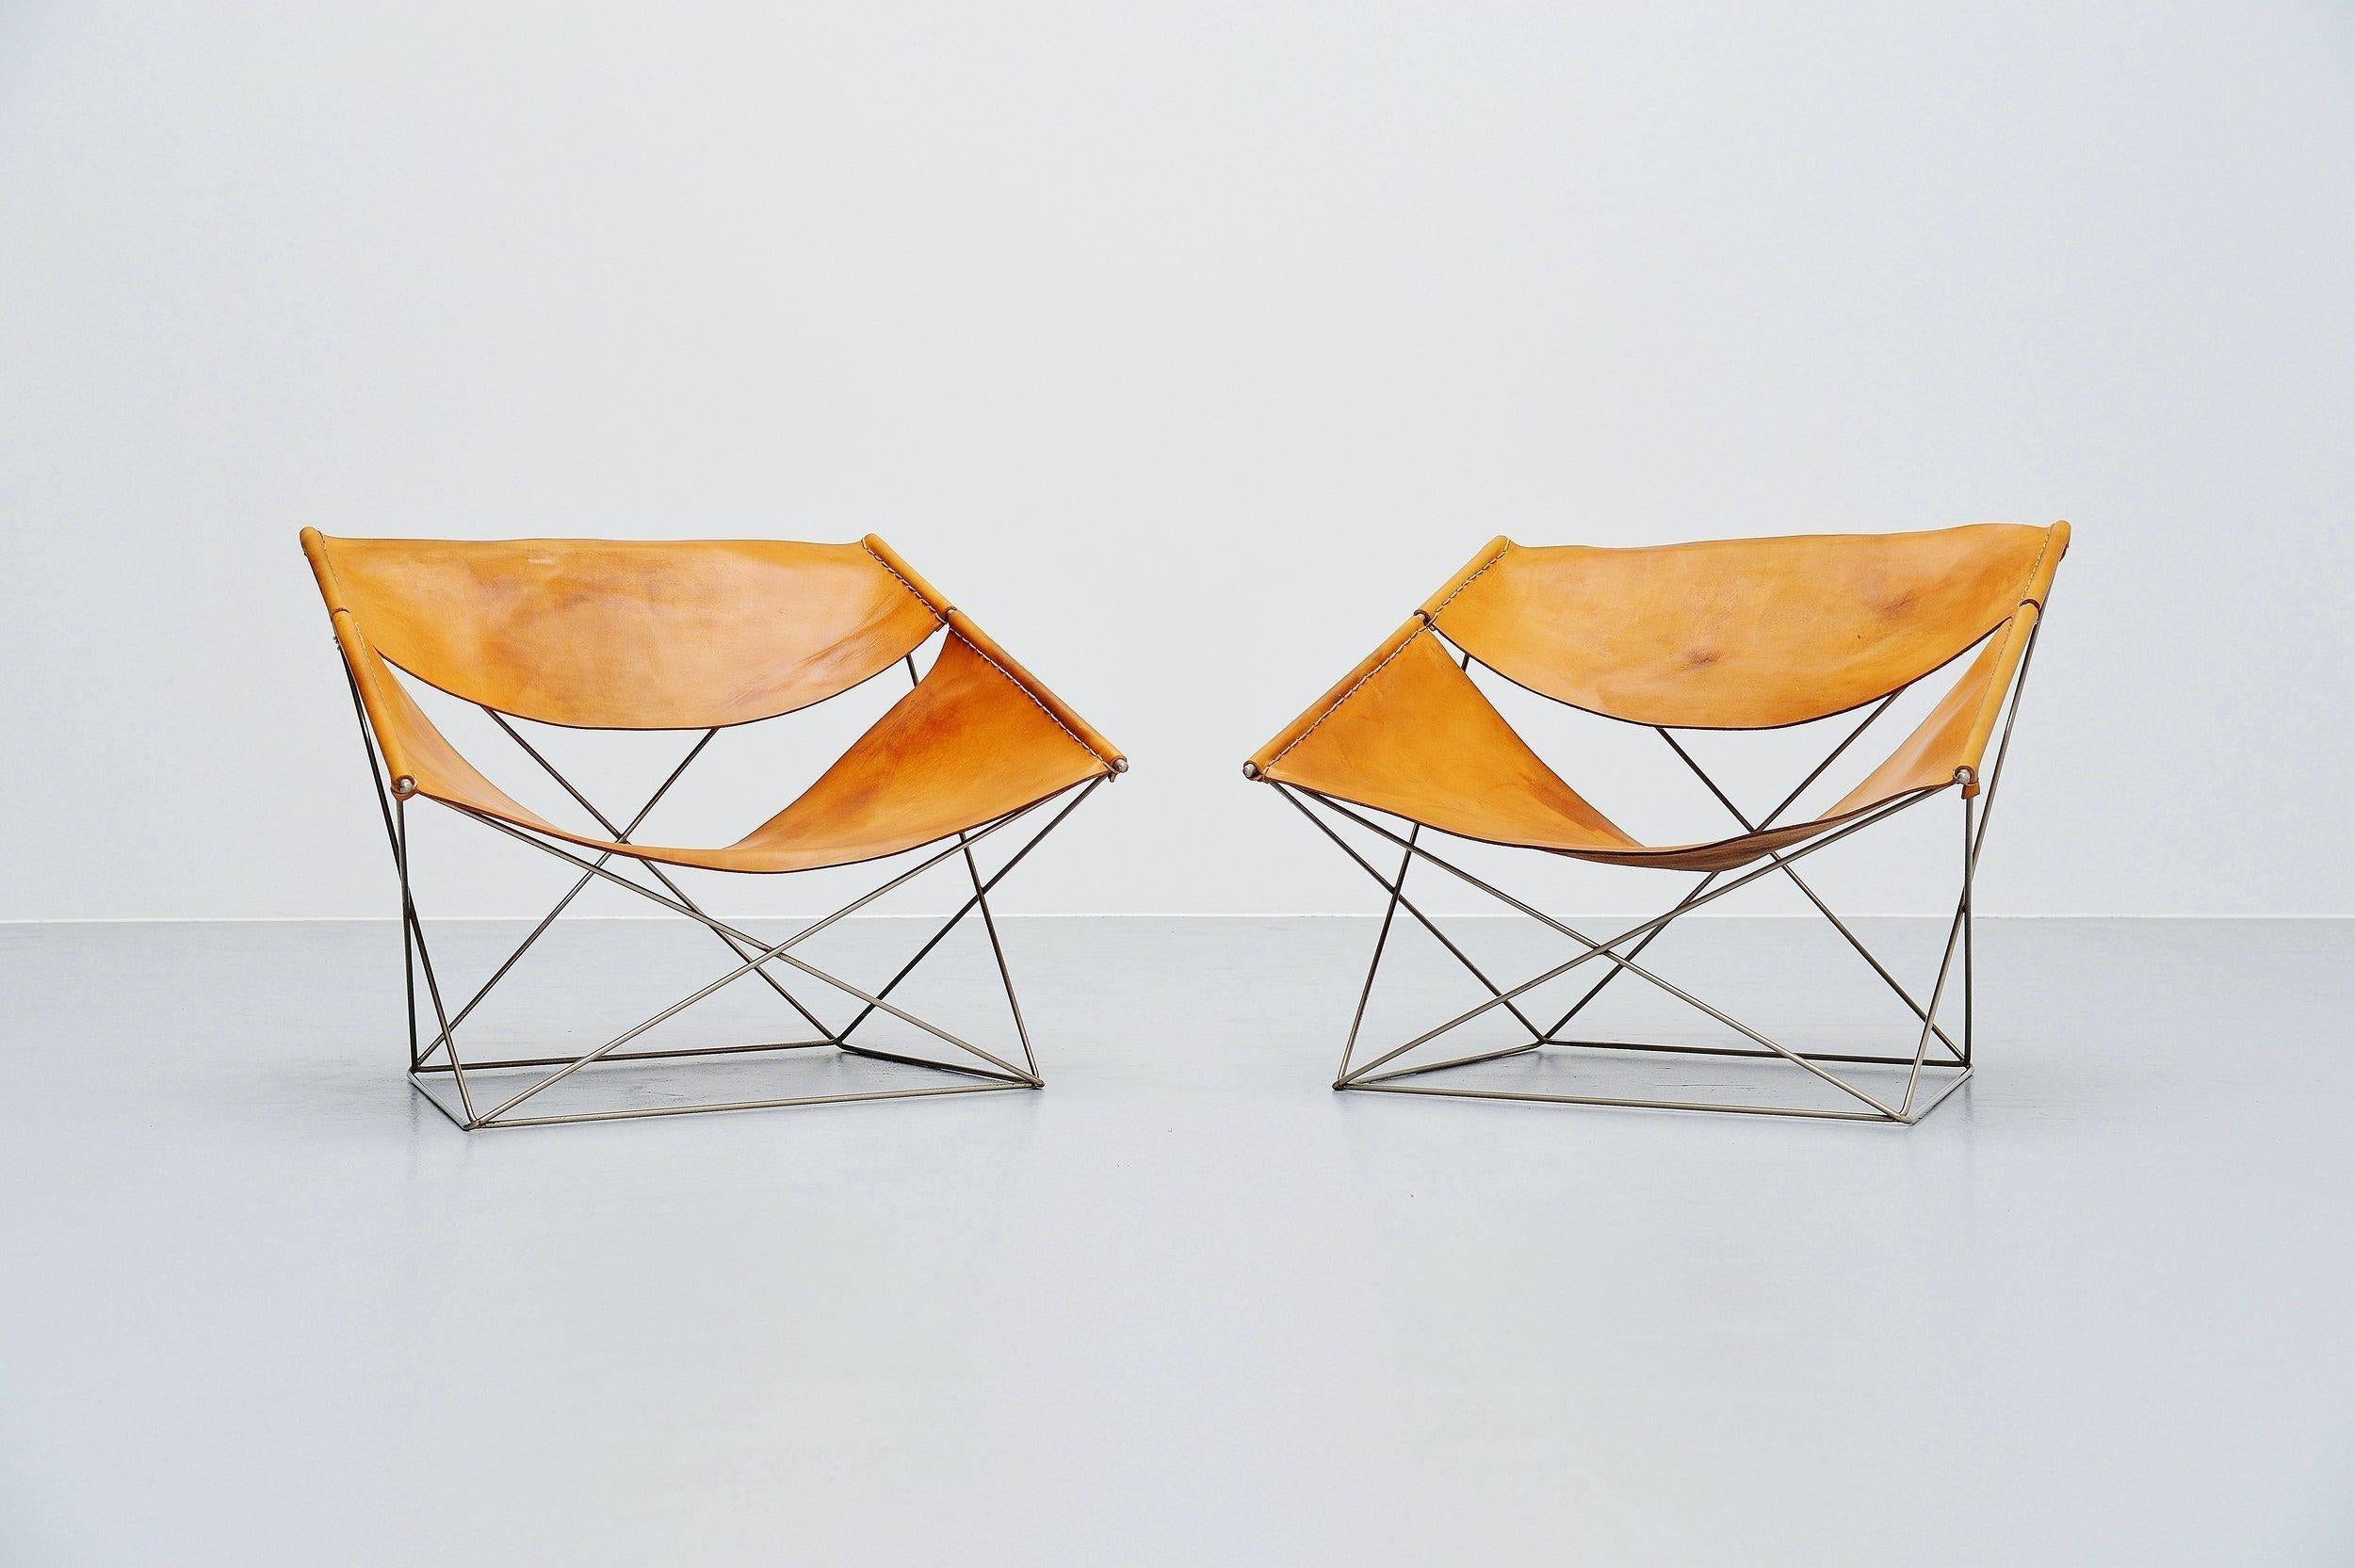 Stunning set of 2 so called 'Butterfly' lounge chairs model F675 designed by Pierre Paulin and manufactured by Artifort, Holland, 1963. These chairs have a nickel plated wire metal frame with nice patina from age, as these are from the first